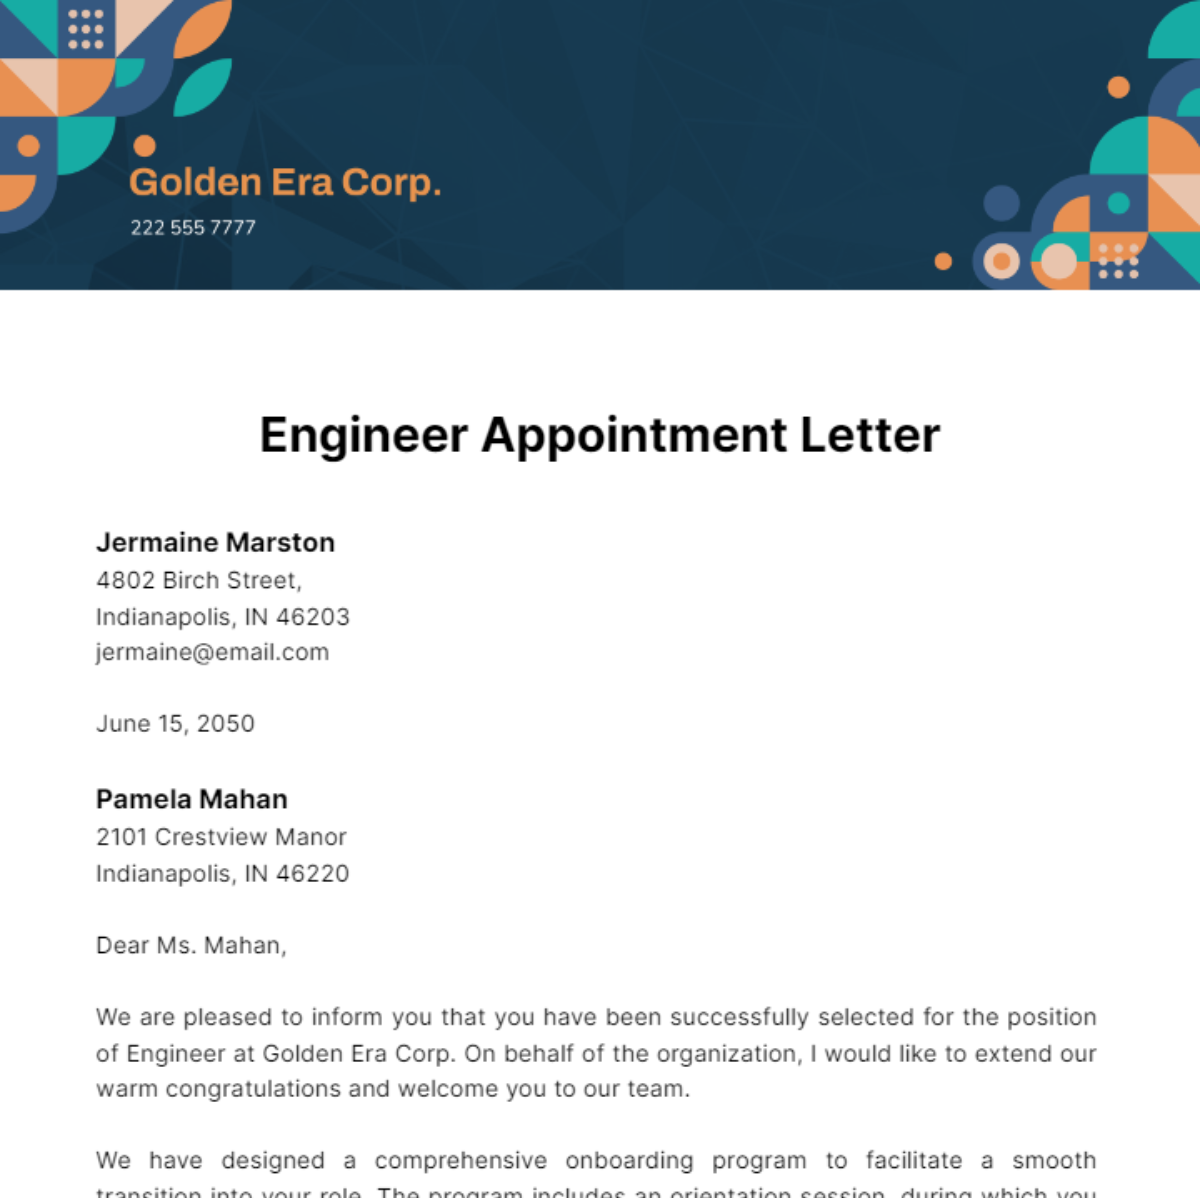 Engineer Appointment Letter Template